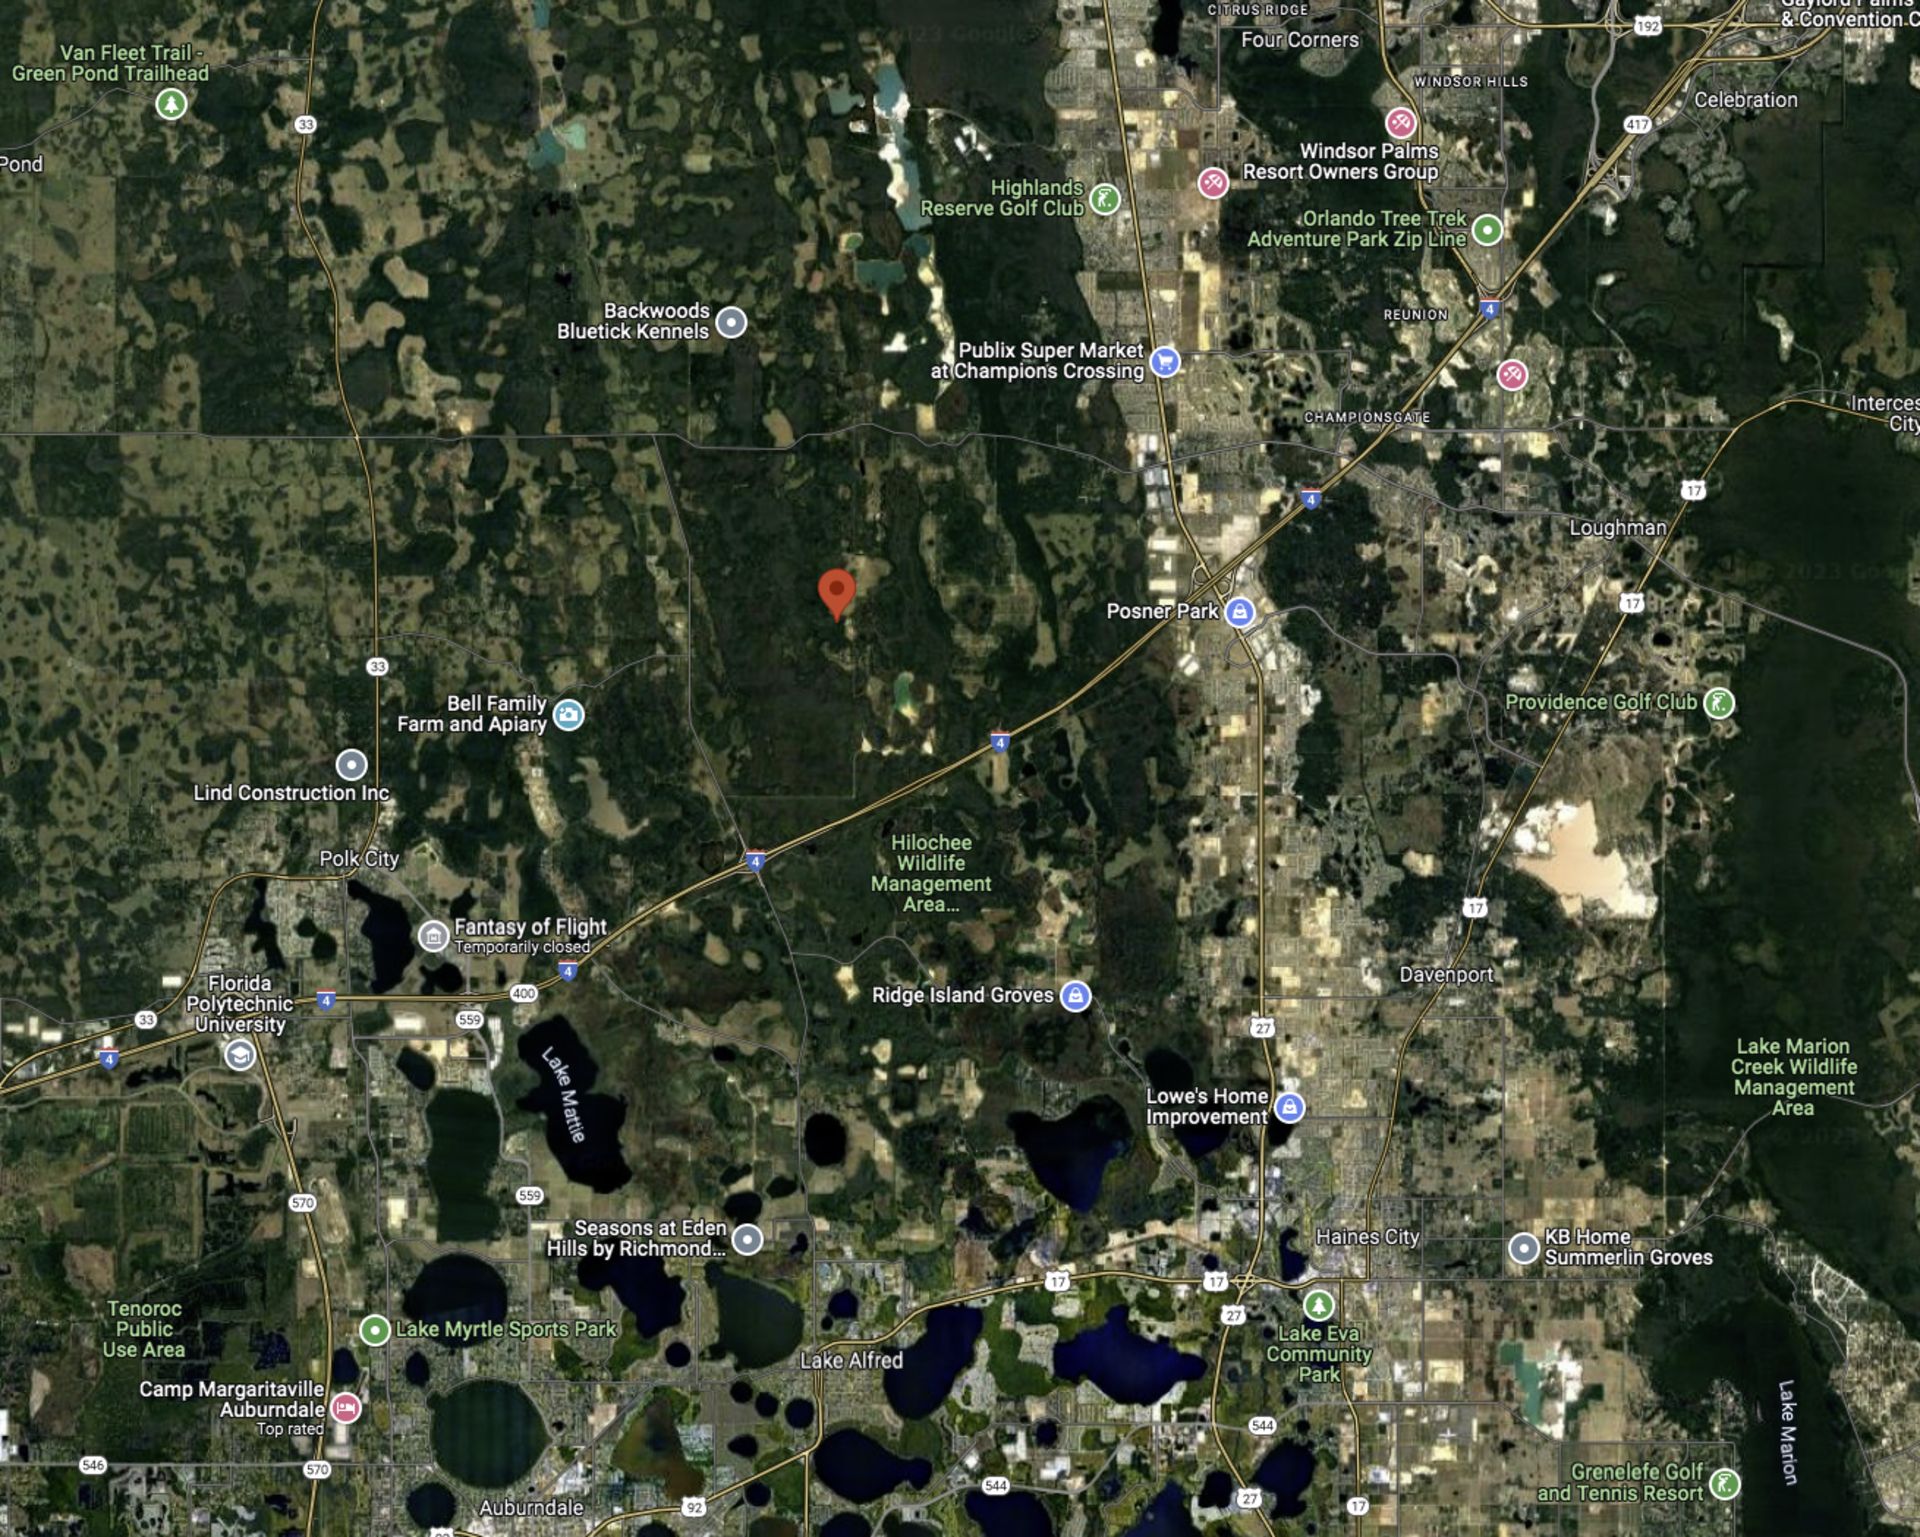 Diversify Your Real Estate Portfolio with this 1-Acre Lot in Sunny Polk County, Florida! - Image 11 of 12